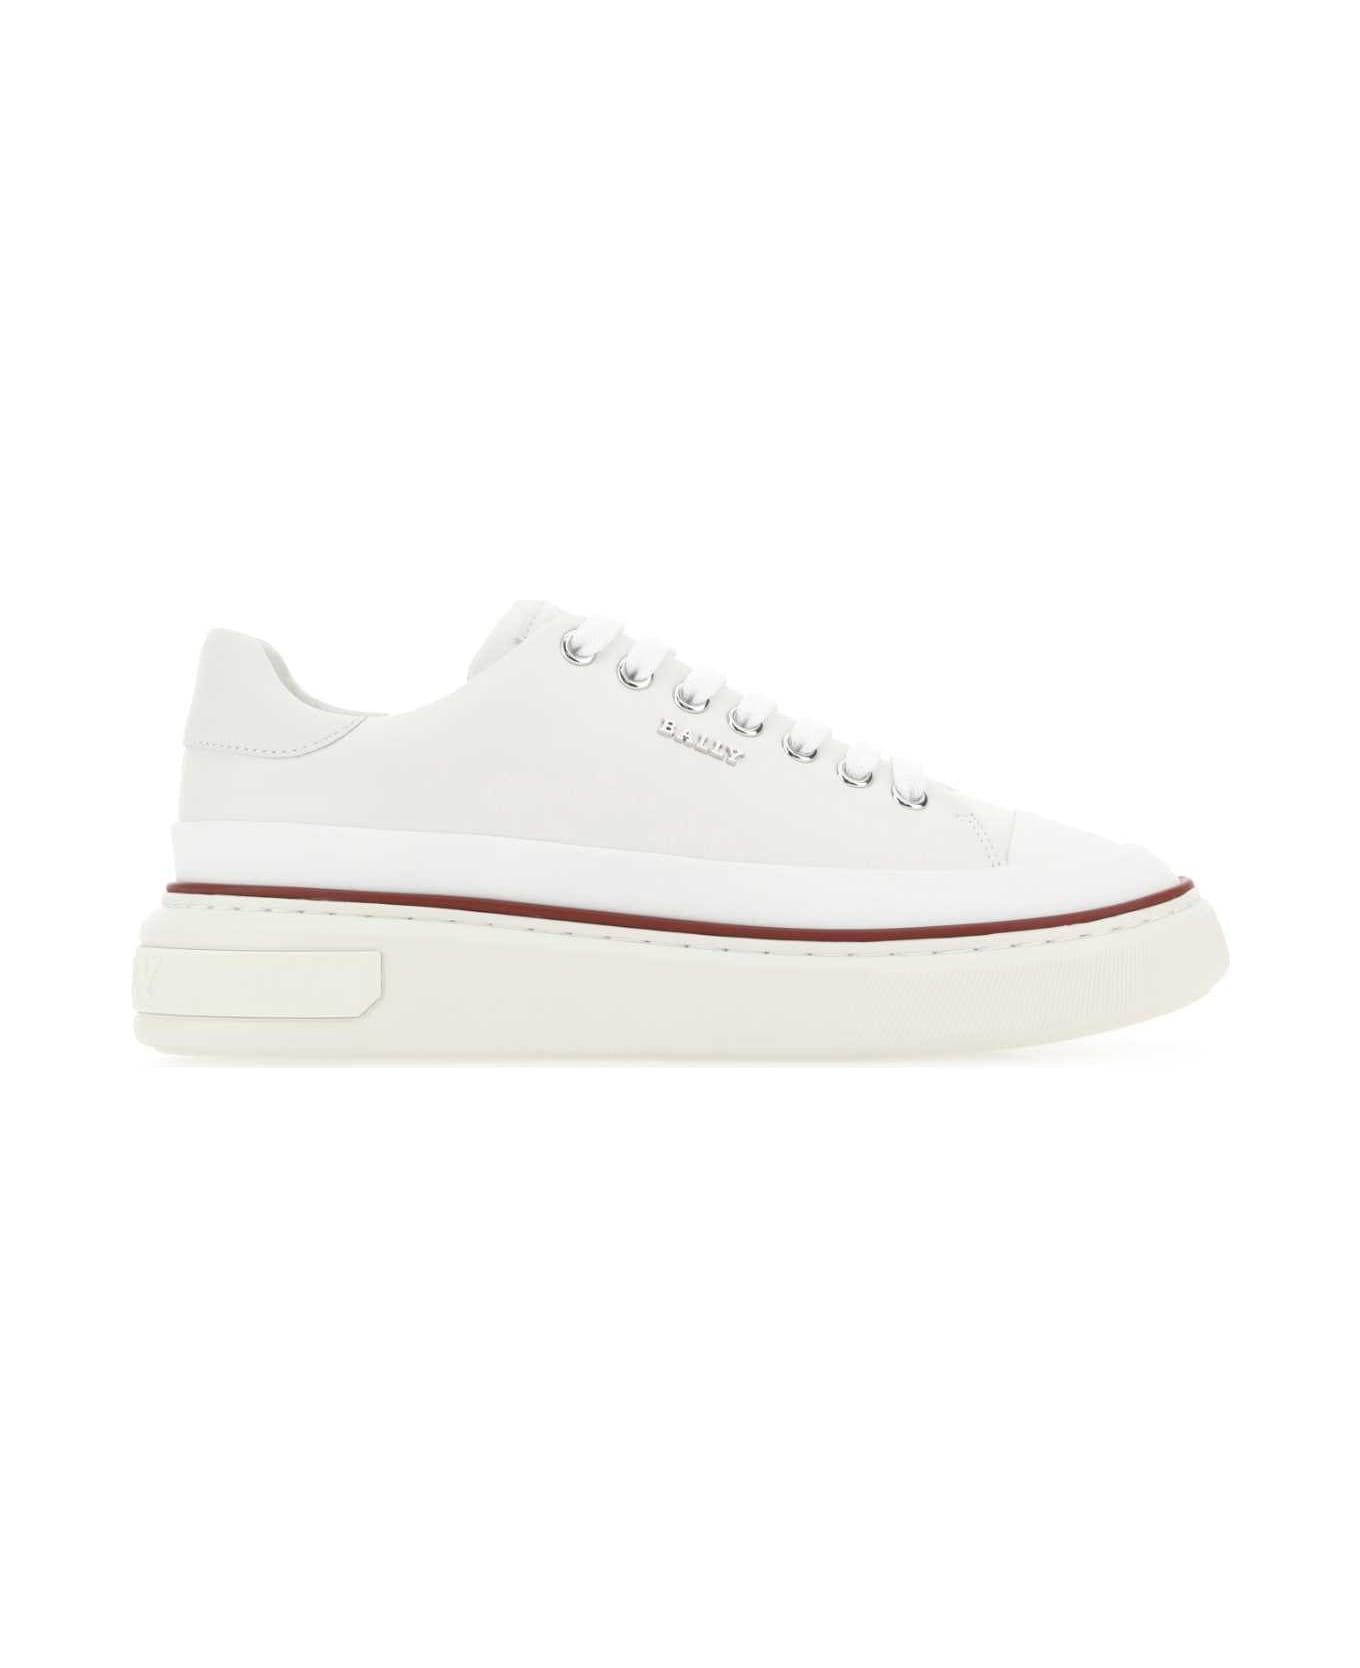 Bally Ivory Leather Maily Sneakers - White